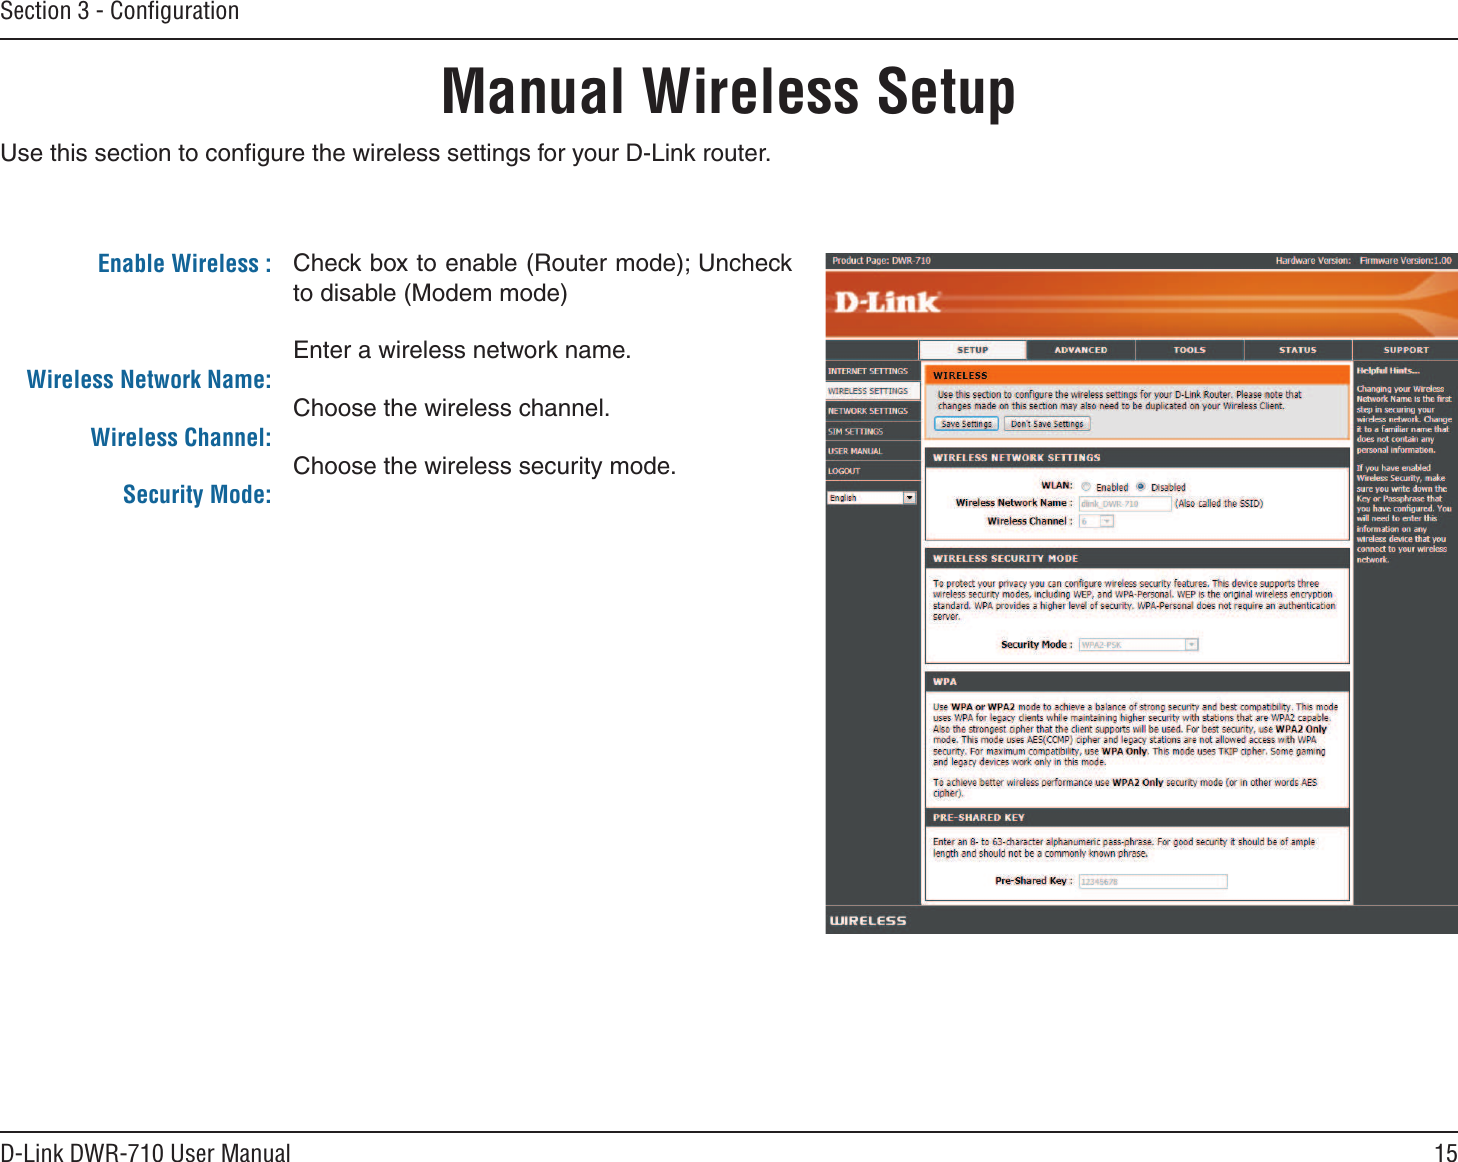 15D-Link DWR-710 User ManualSection 3 - ConﬁgurationManual Wireless SetupCheck box to enable (Router mode); Uncheck to disable (Modem mode)Enter a wireless network name.Choose the wireless channel.Choose the wireless security mode.Enable Wireless :Wireless Network Name:Wireless Channel:Security Mode:Use this section to conﬁgure the wireless settings for your D-Link router.